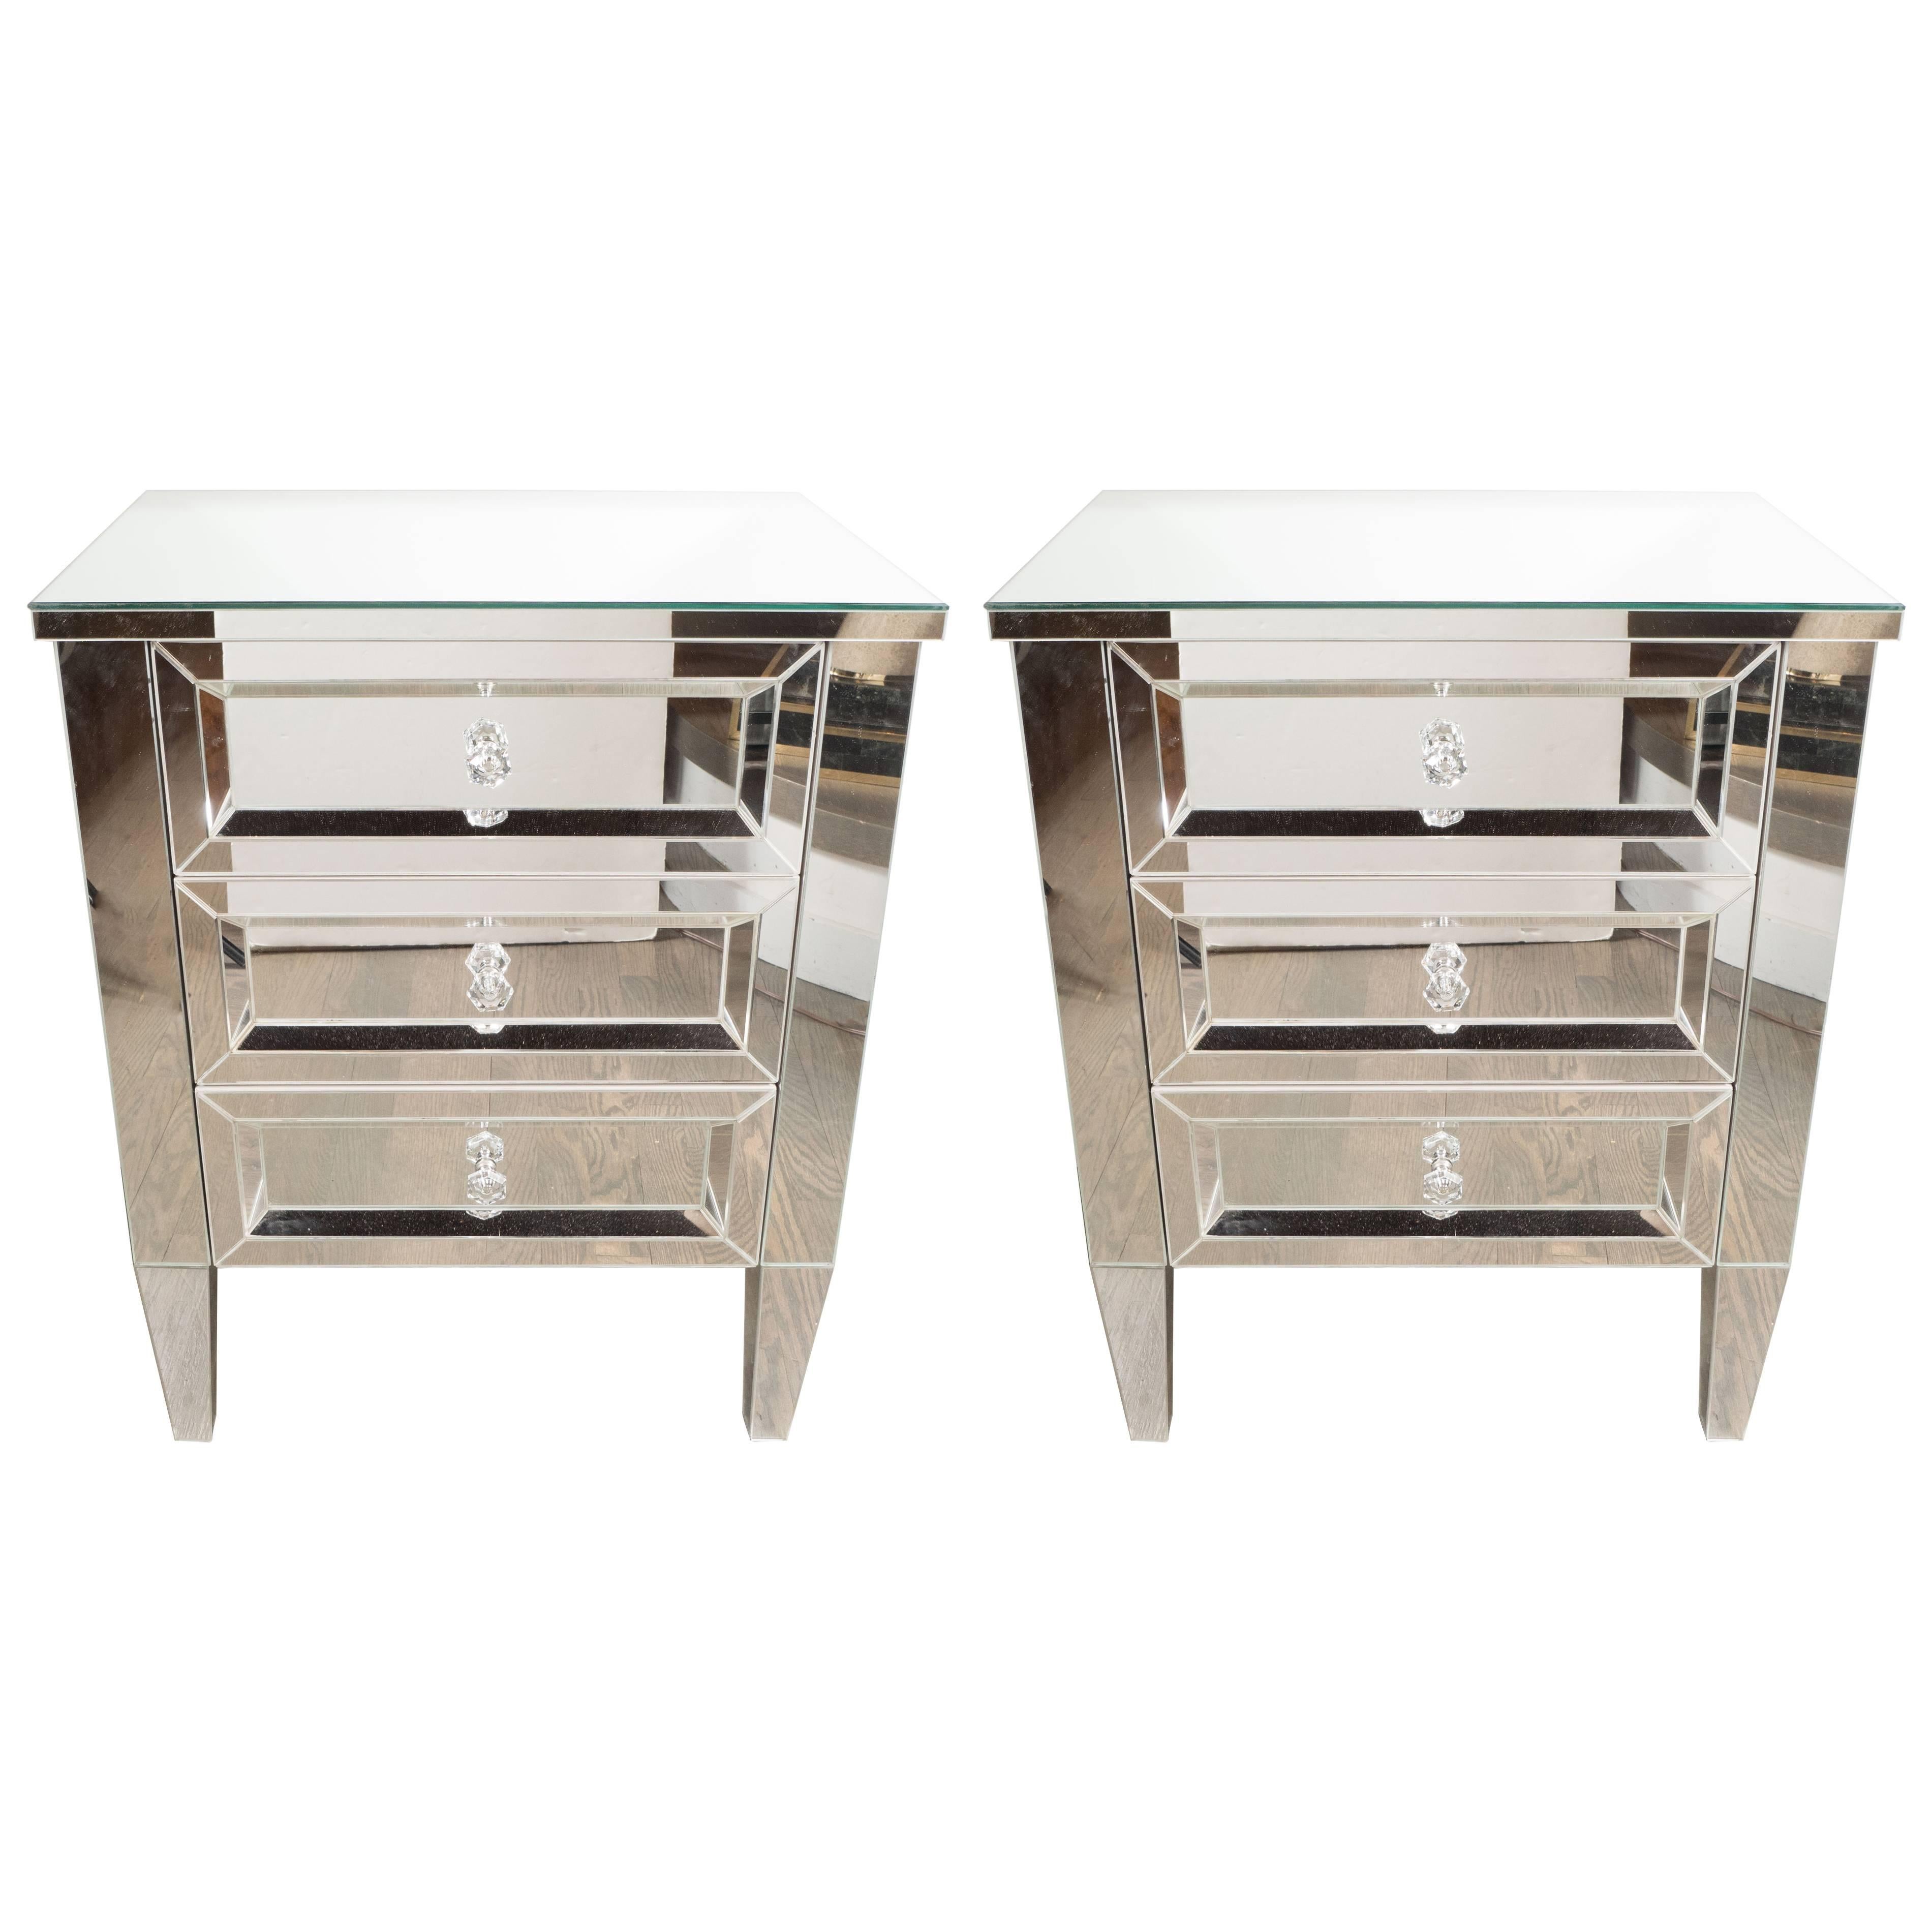 Pair of Hollywood Regency Style Custom Mirrored Nightstands with Three Drawers